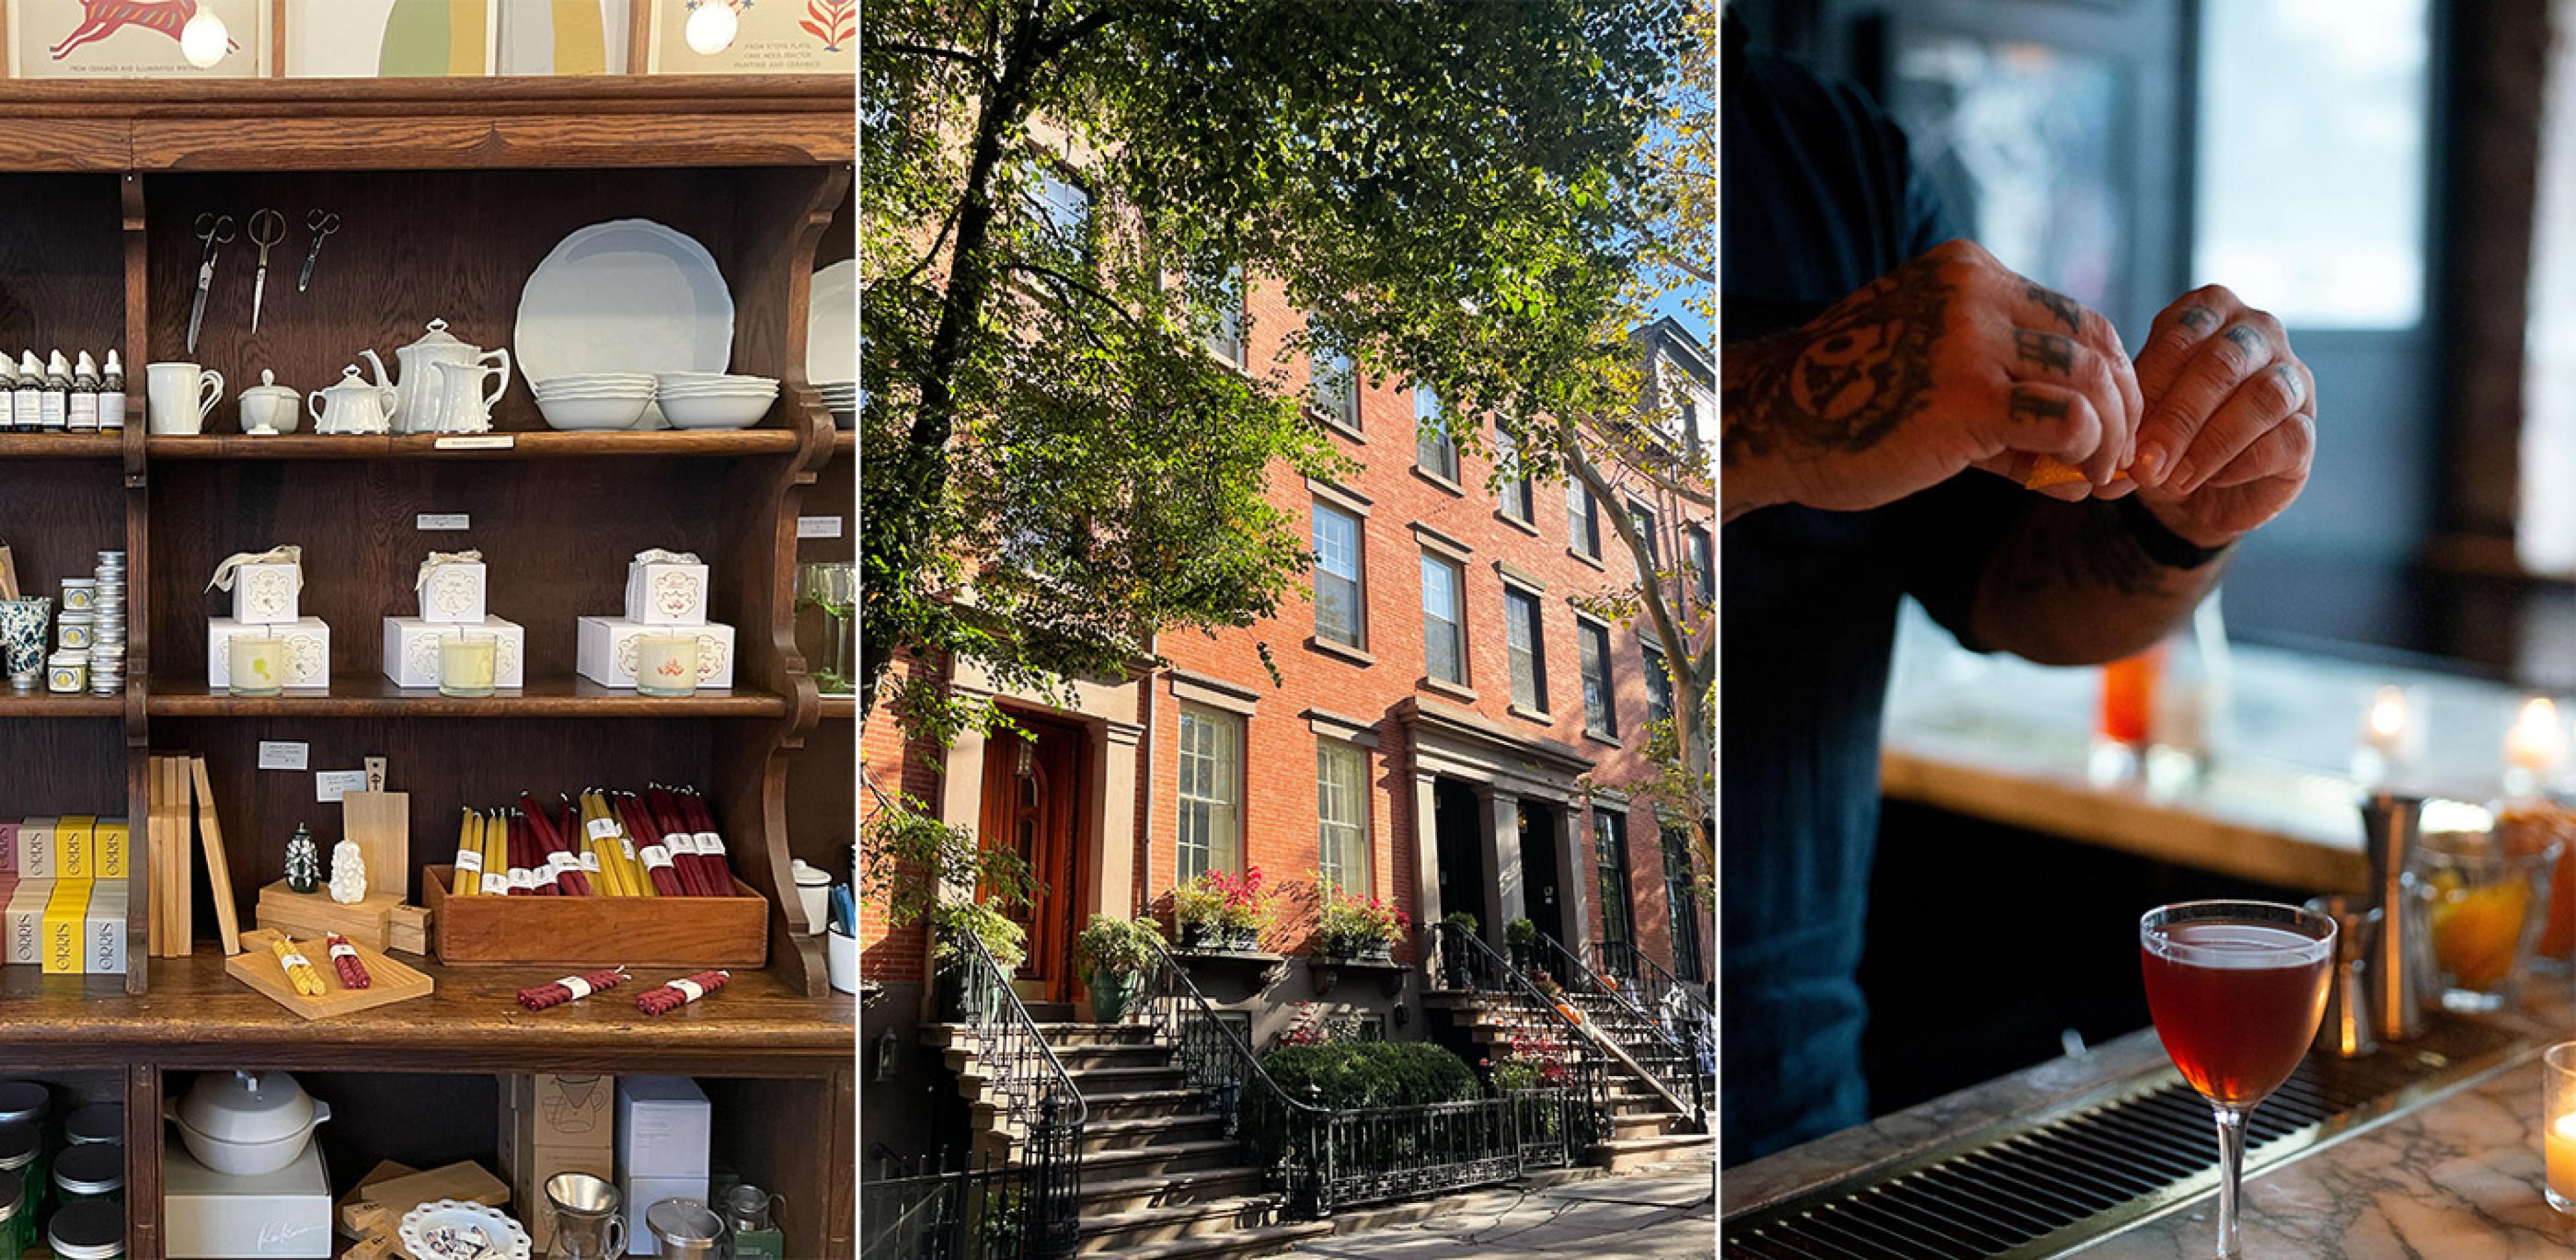 three photos. one of shelves stocked with houseware goods; in middle, looking at two brick townhouses on sunny day; on right, a bartender making a cocktail